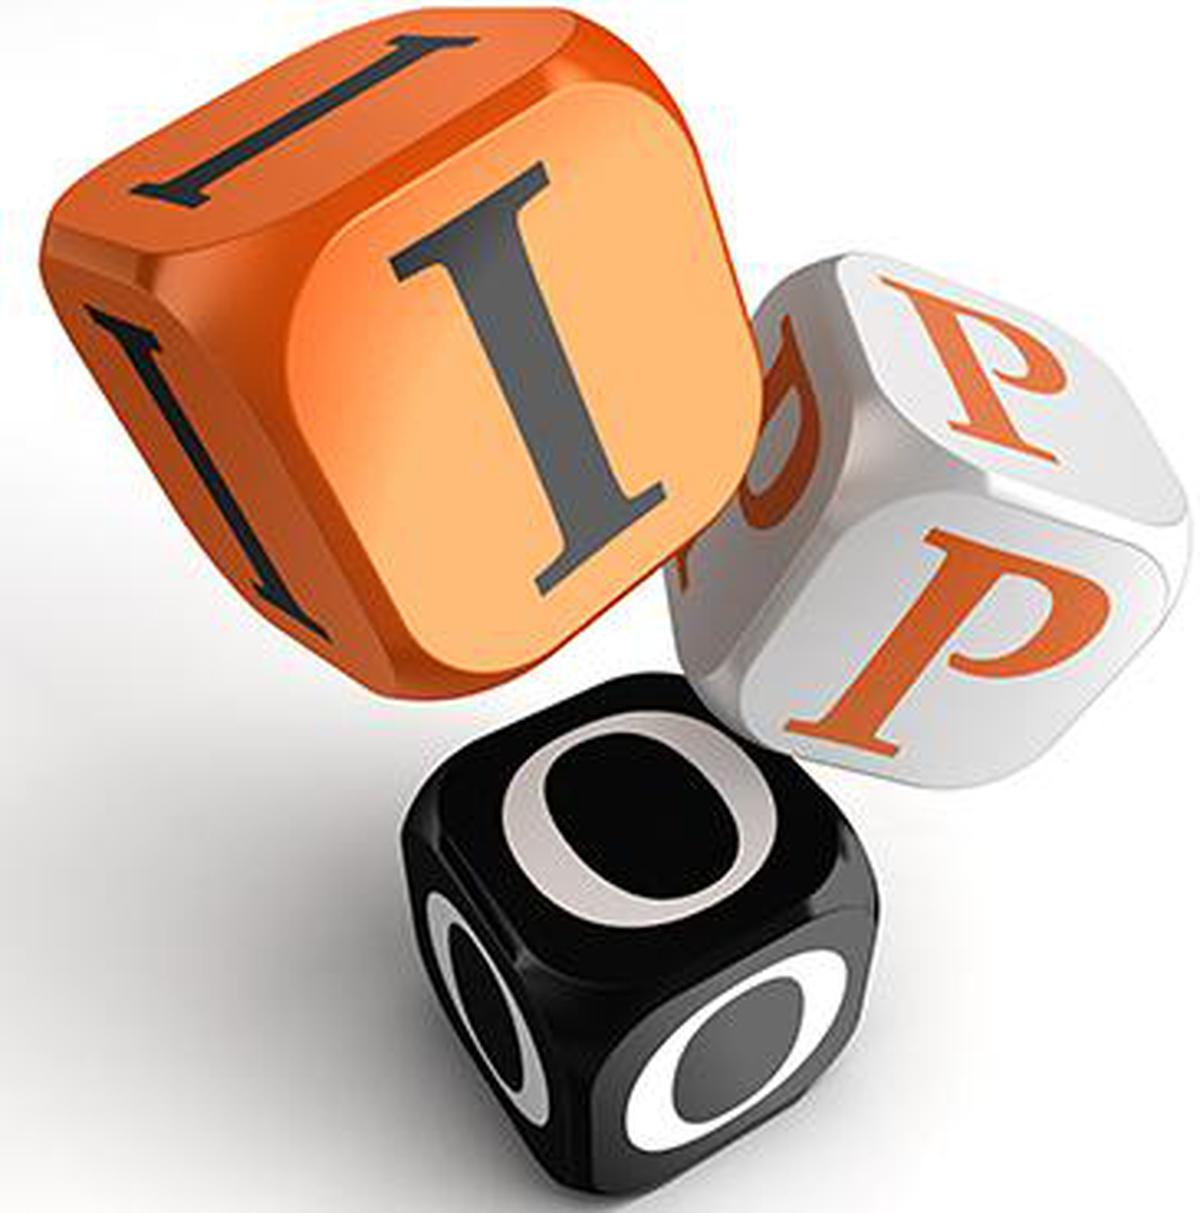 ipo orange black dice blocks on white background standing for initial public offering